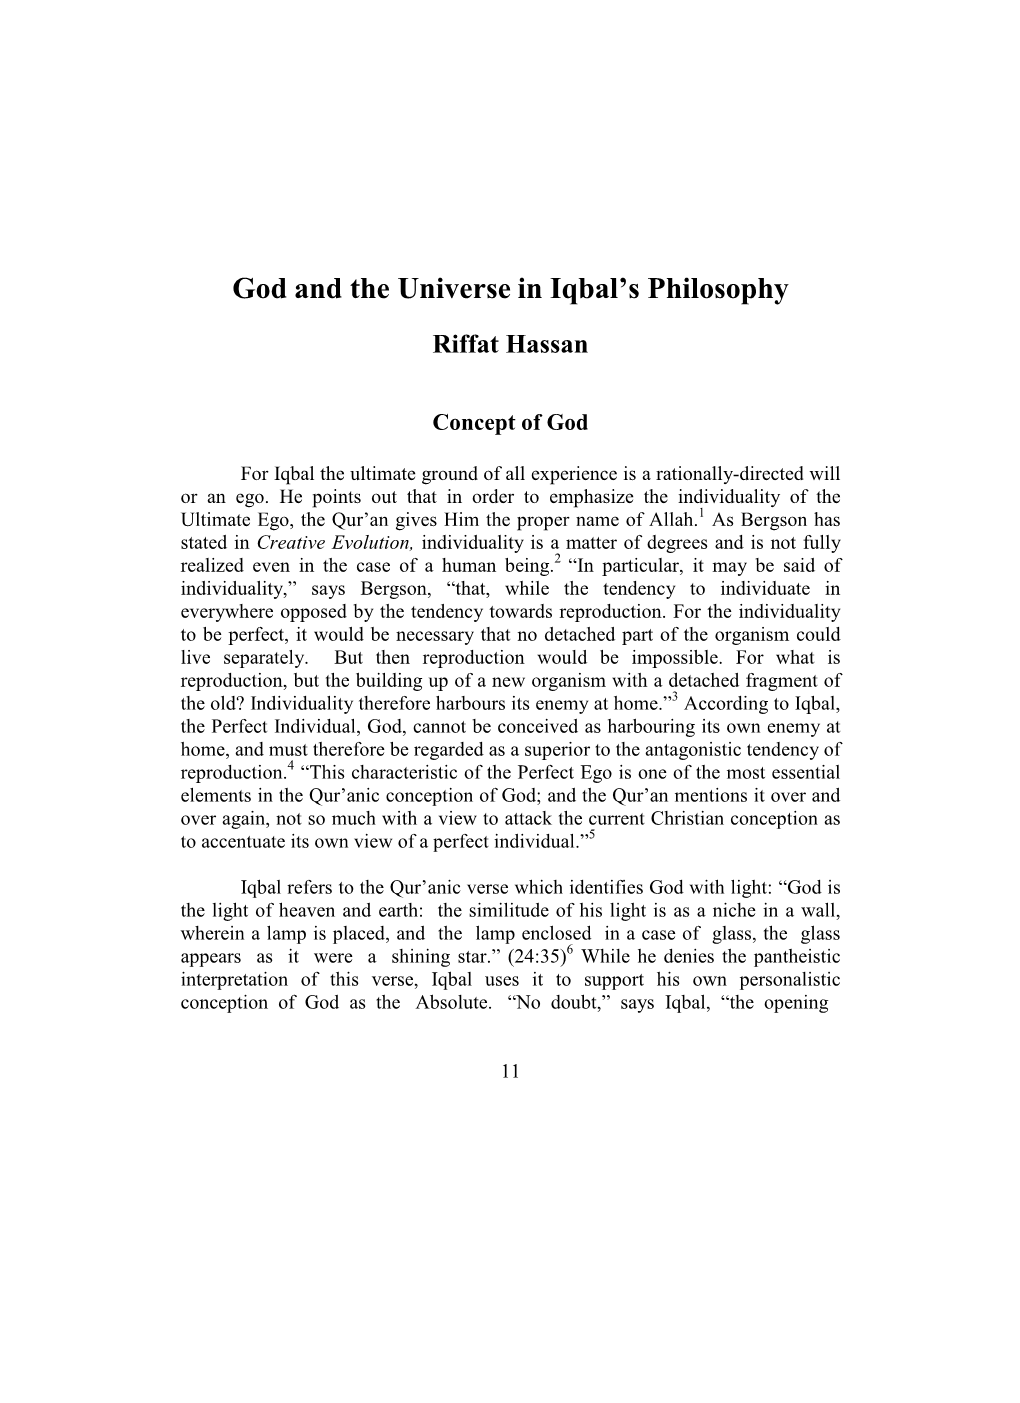 God and the Universe in Iqbal's Philosophy